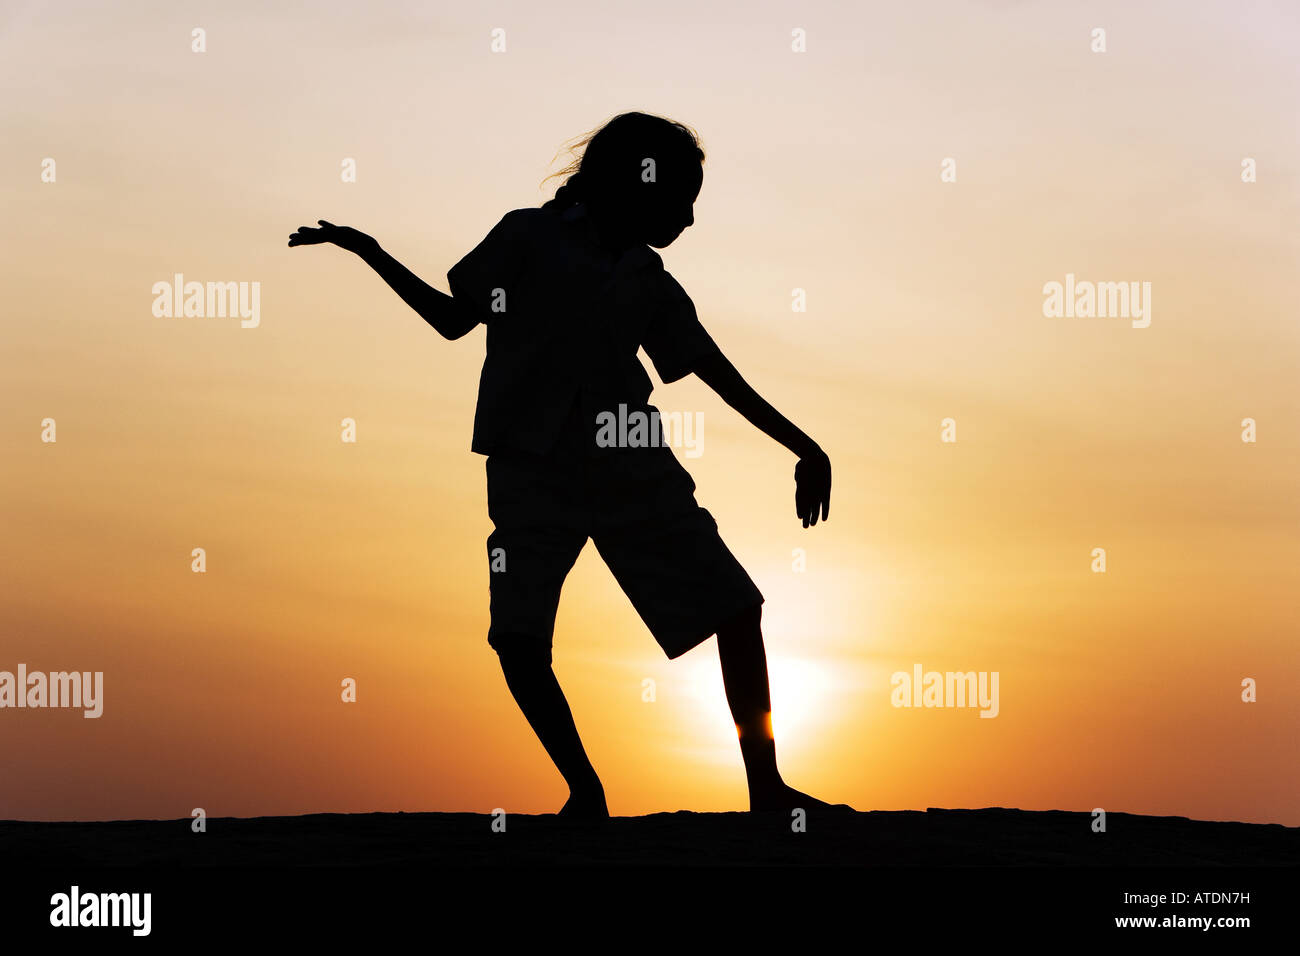 Indian girl silhouette dancing on a rock at sunset. India Stock Photo